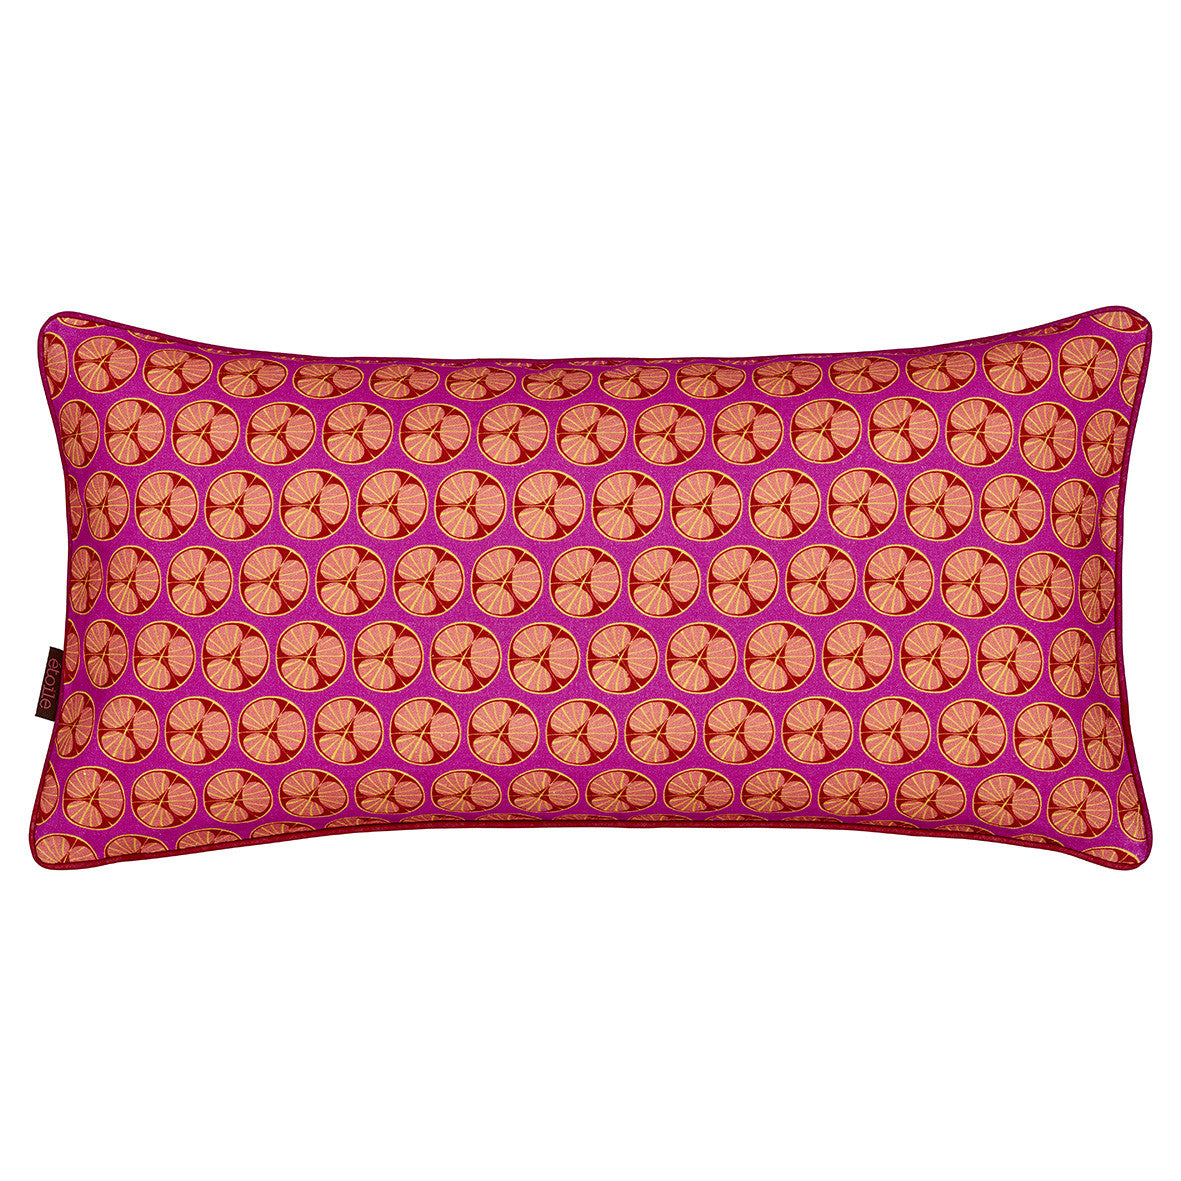 Graphic Fruit Cross Section Pattern Linen Union Printed Decorative Throw Pillow in Fuchsia Pink 12x24" 30x60cm